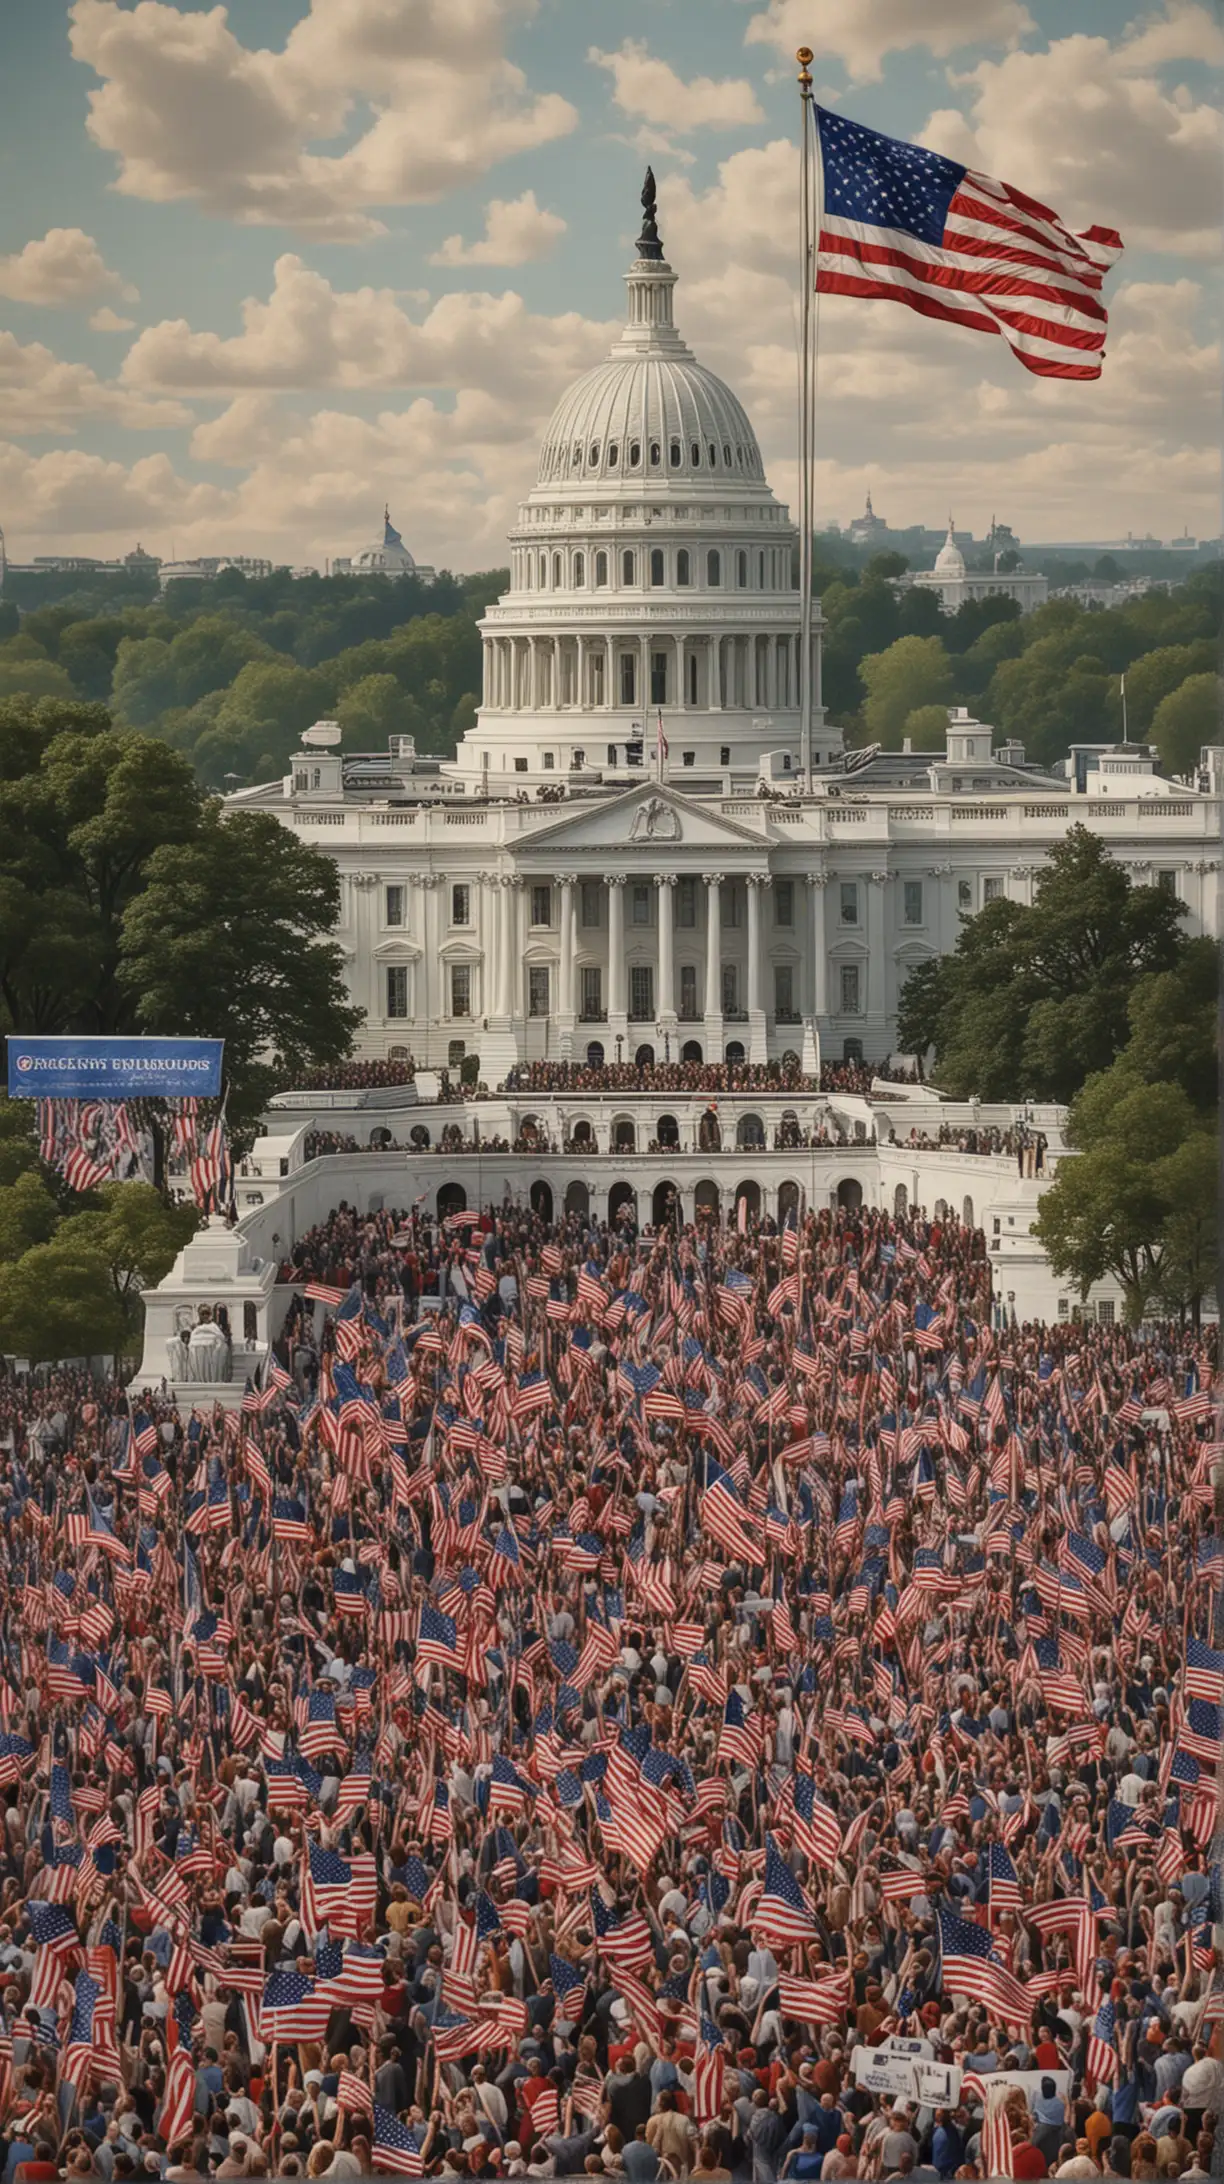 Depict a scene of celebration in Washington, D.C., as news of the successful purchase of Alaska spreads. Show crowds gathering outside the White House and Capitol Building, waving American flags and cheering. Hyper realistic